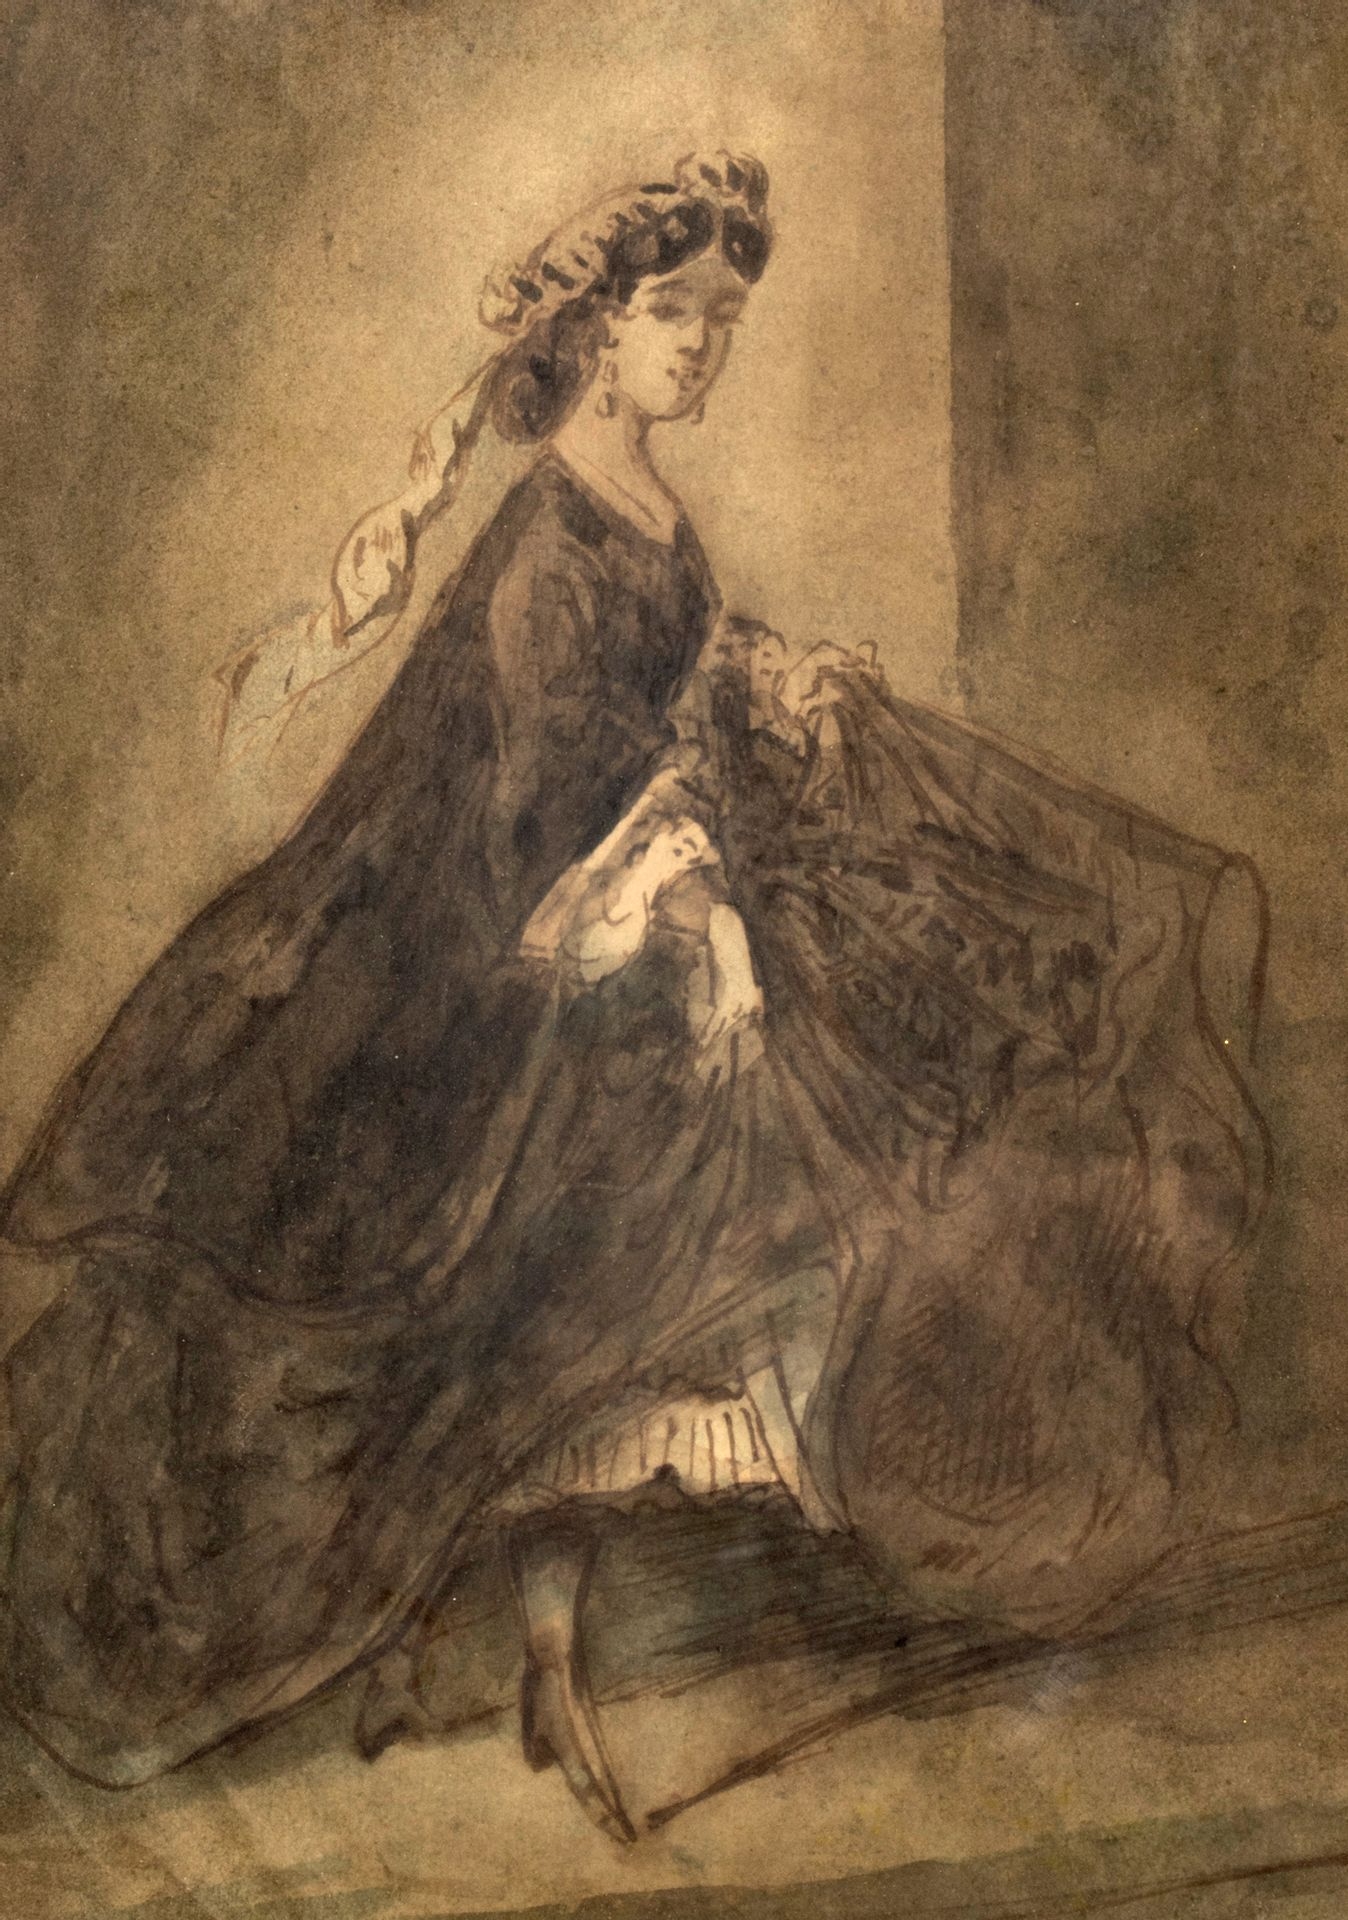 Woman at the Ball by Constantin Guys